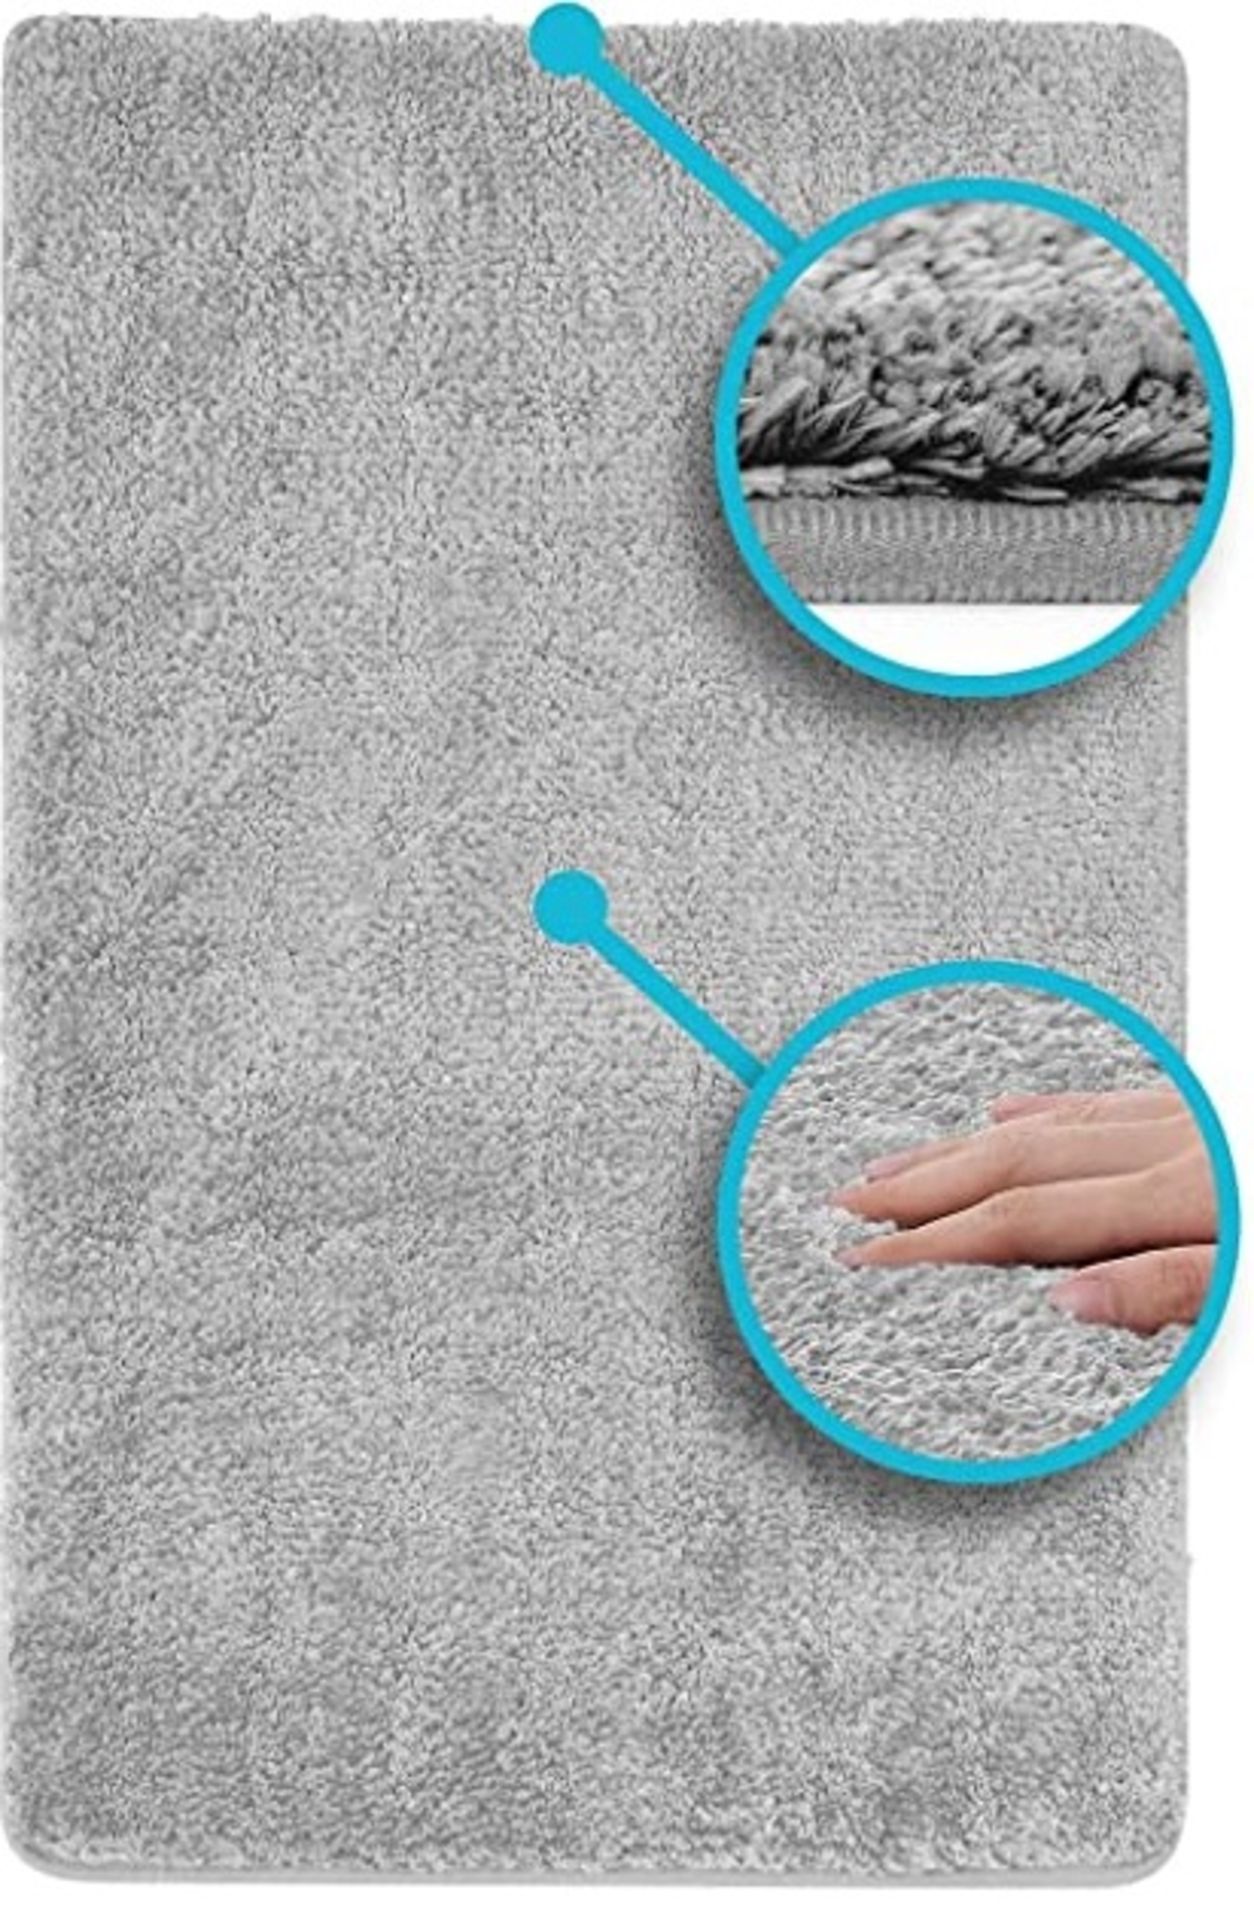 5 x Microfibre Plush Rugs - New & Sealed - Image 2 of 2